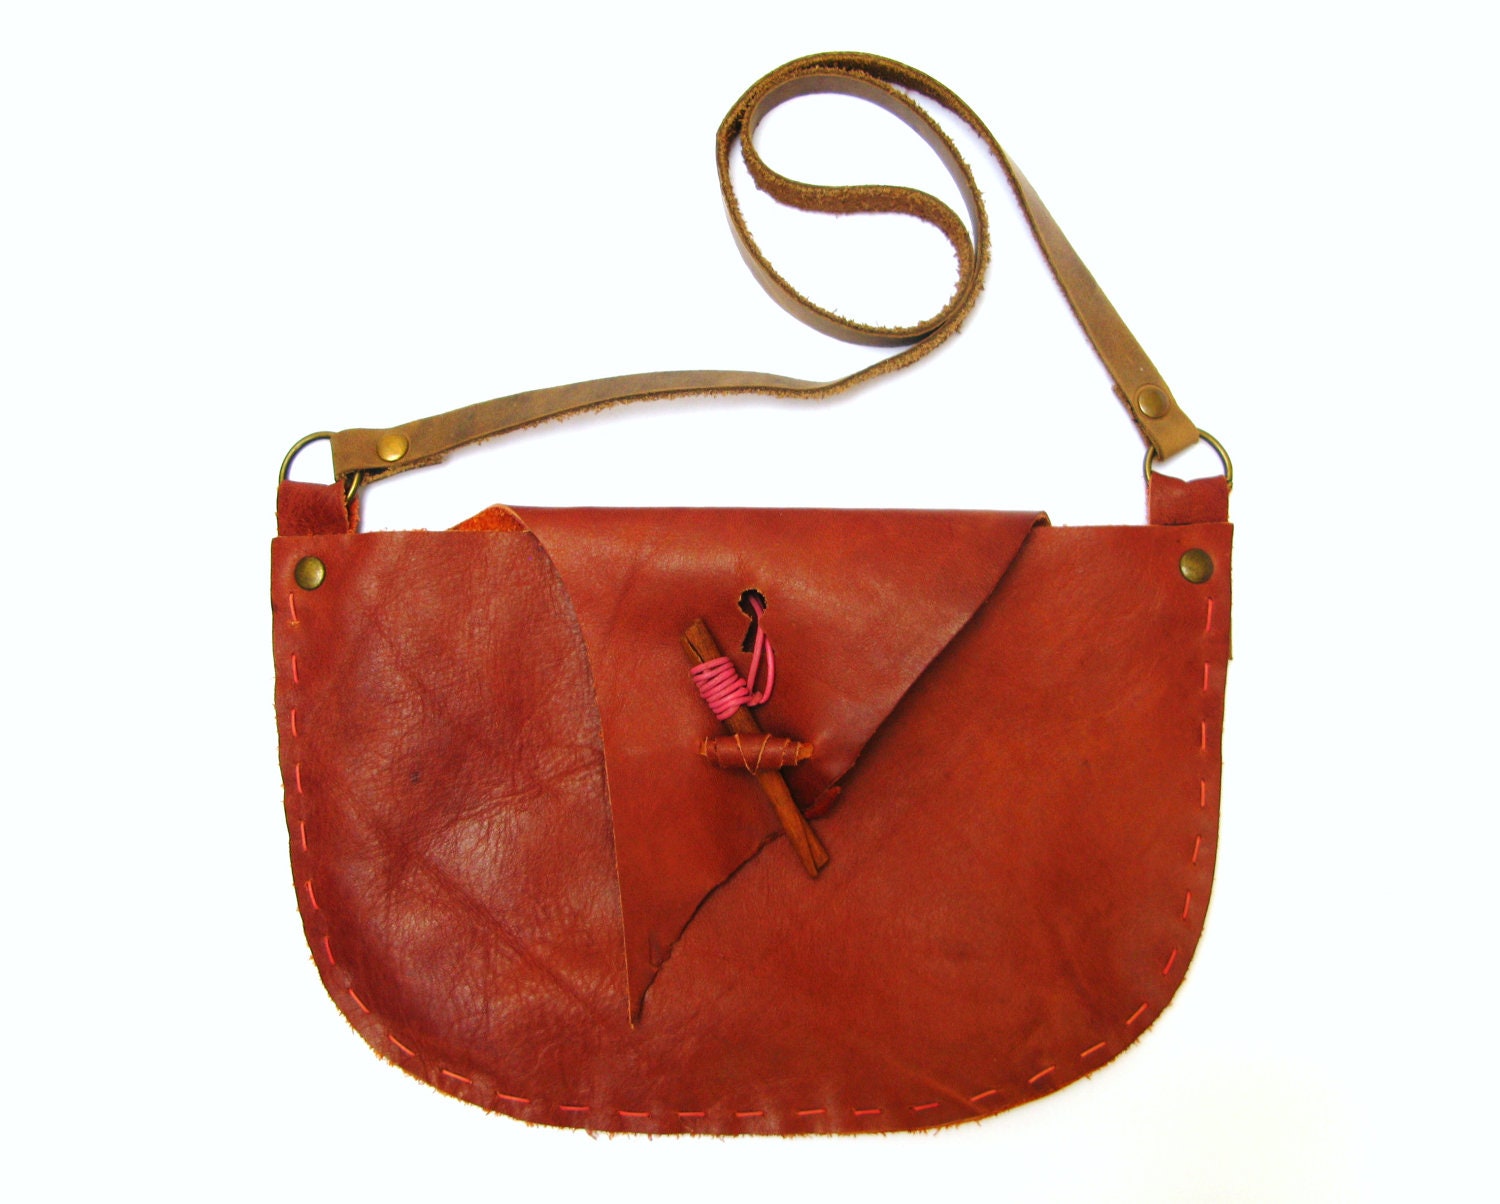 Autumn Fall, Hand Stitched Shoulder Bag Purse in Rusty Orange Leather with Cinnamon Stick Closure,OOAK - askidas